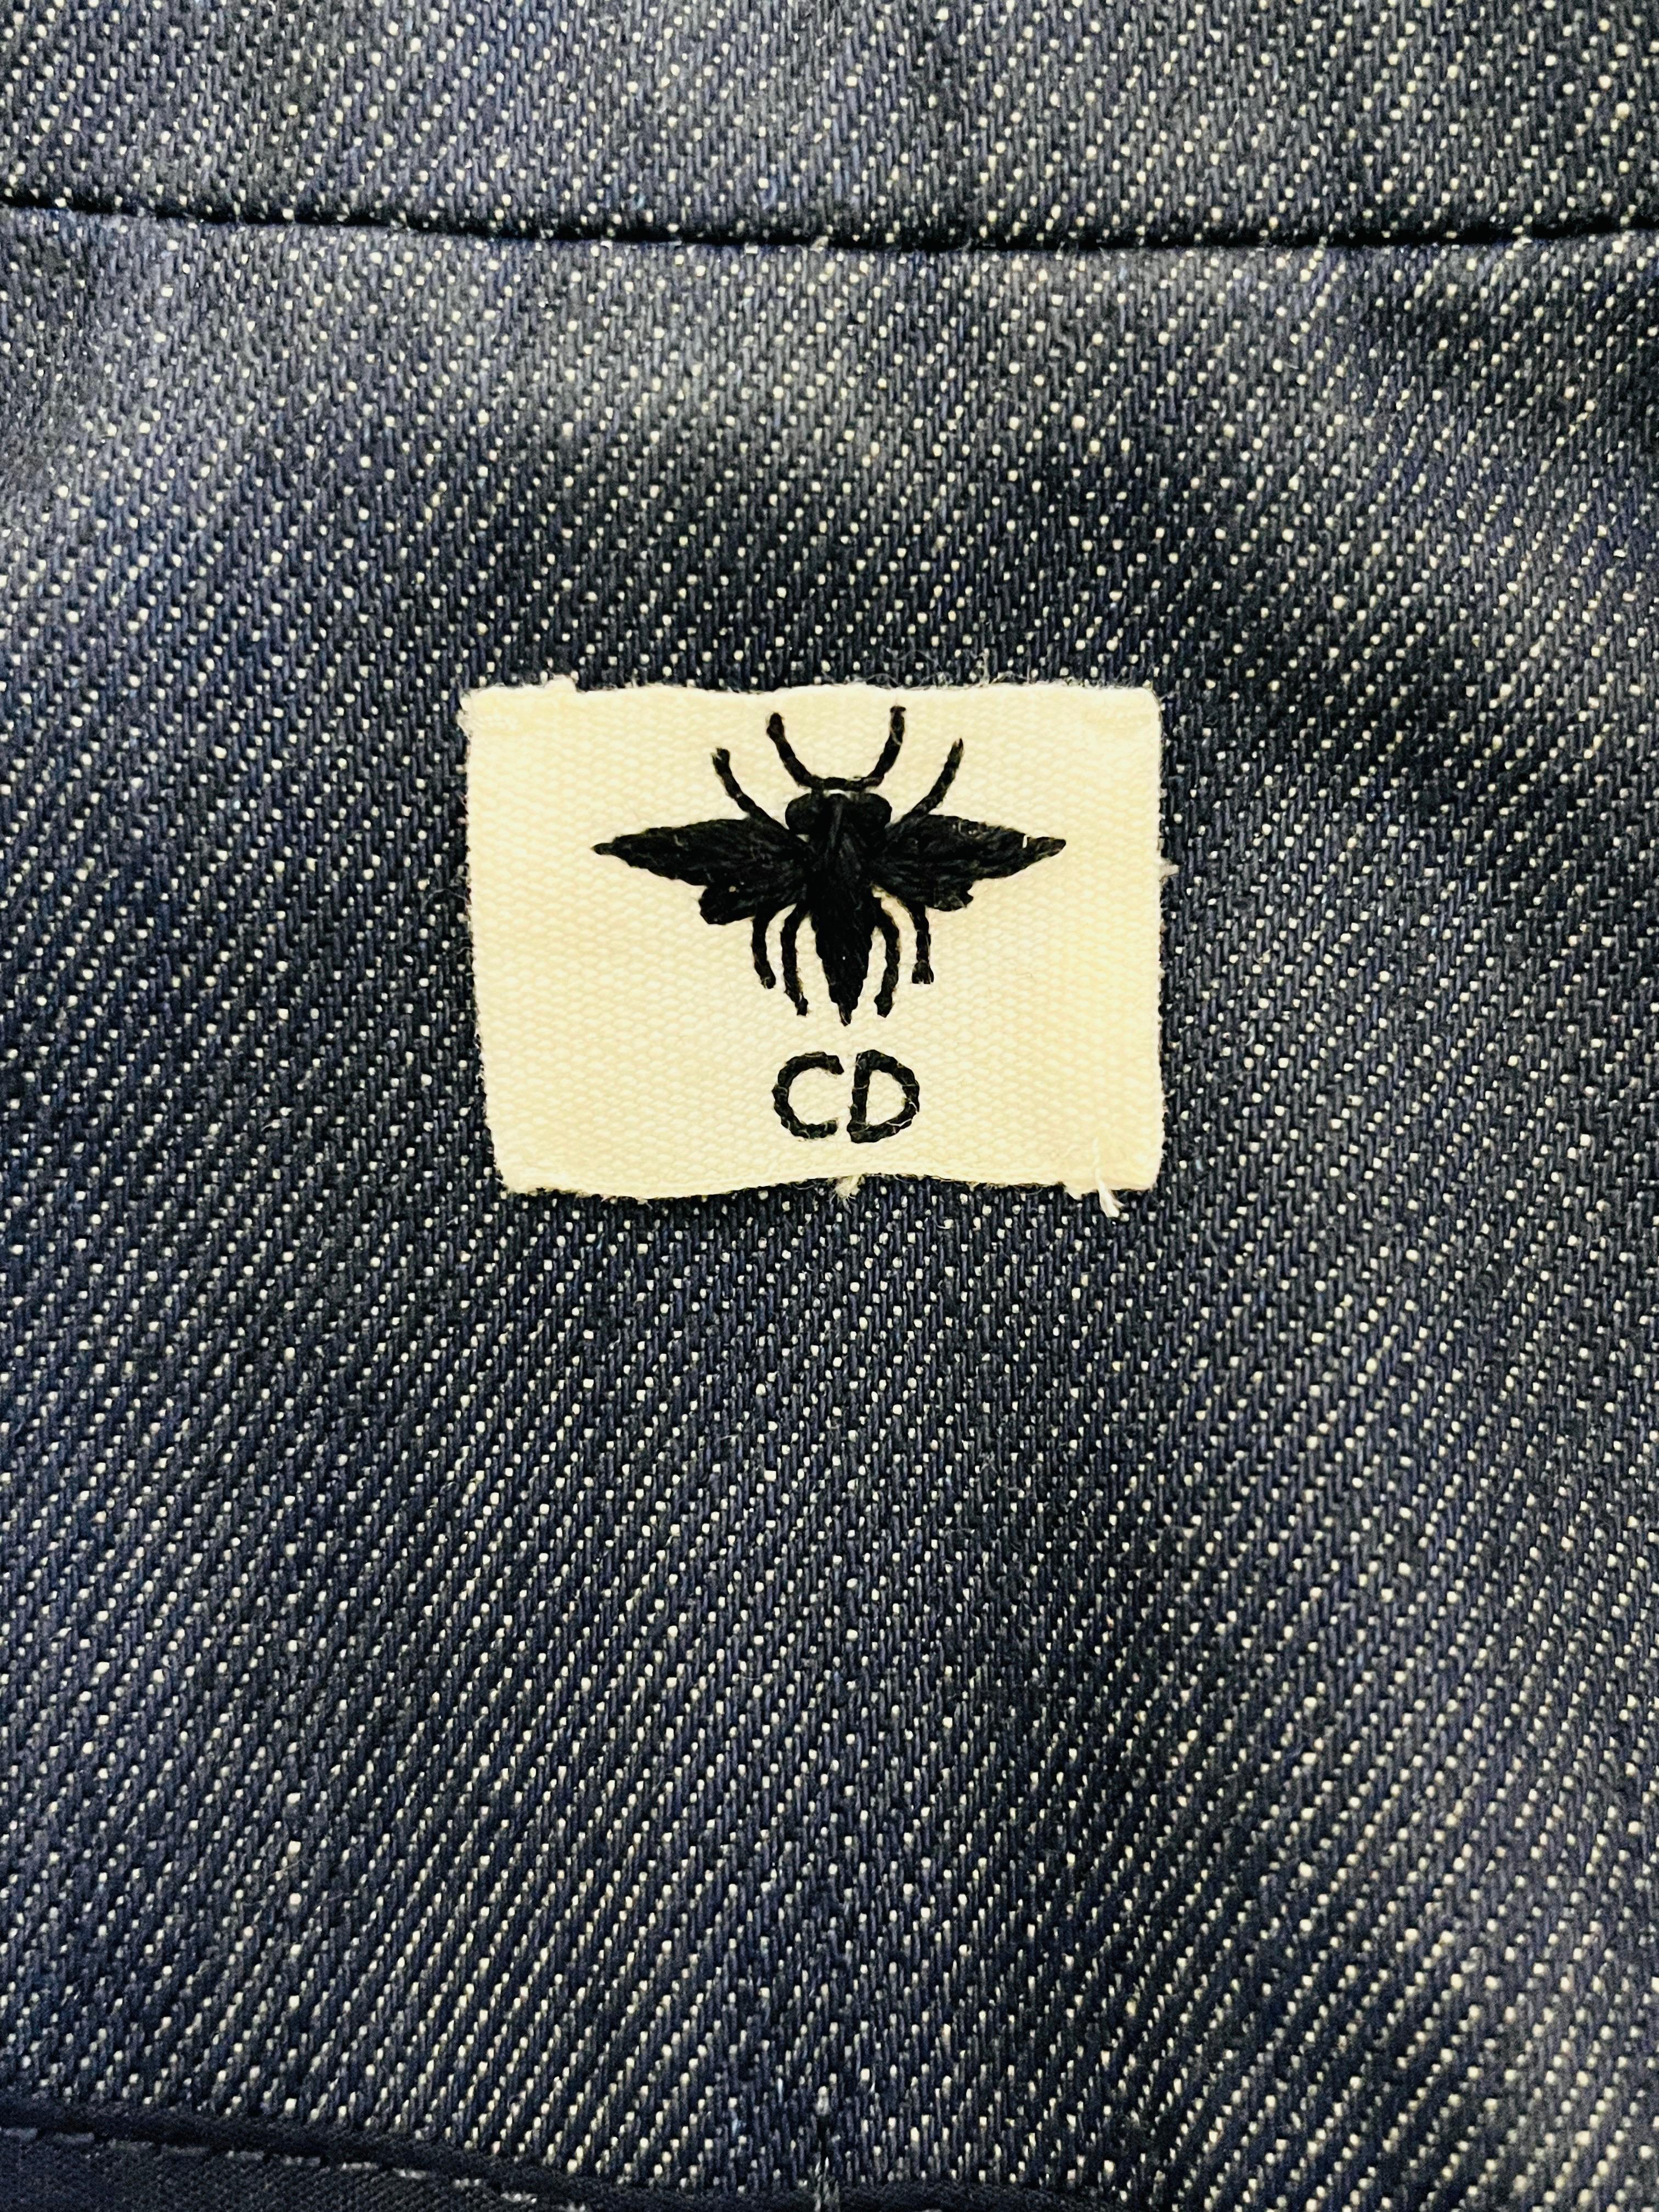 Christian Dior Denim Bar Jacket With Bee Embroidery For Sale 3